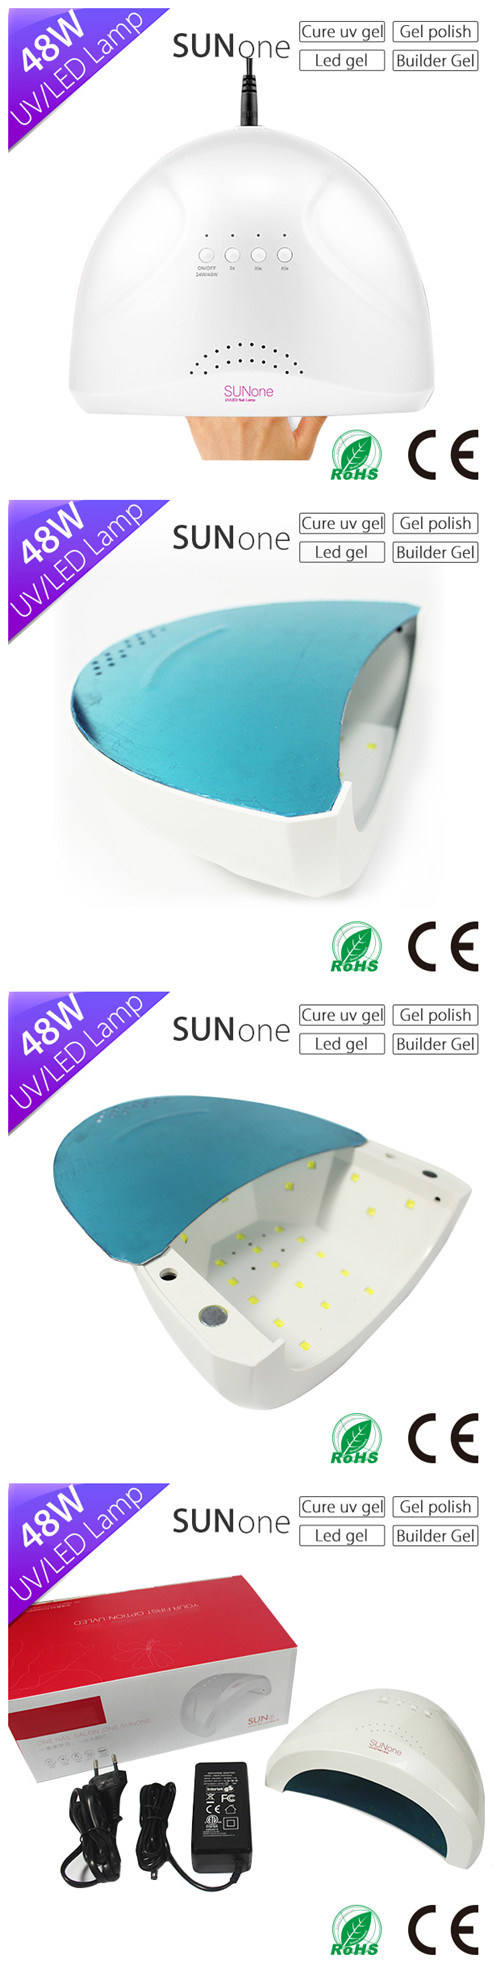 Curing All Kinds of Gel 48W Sunone Sunlight Nail LED UV Lamp